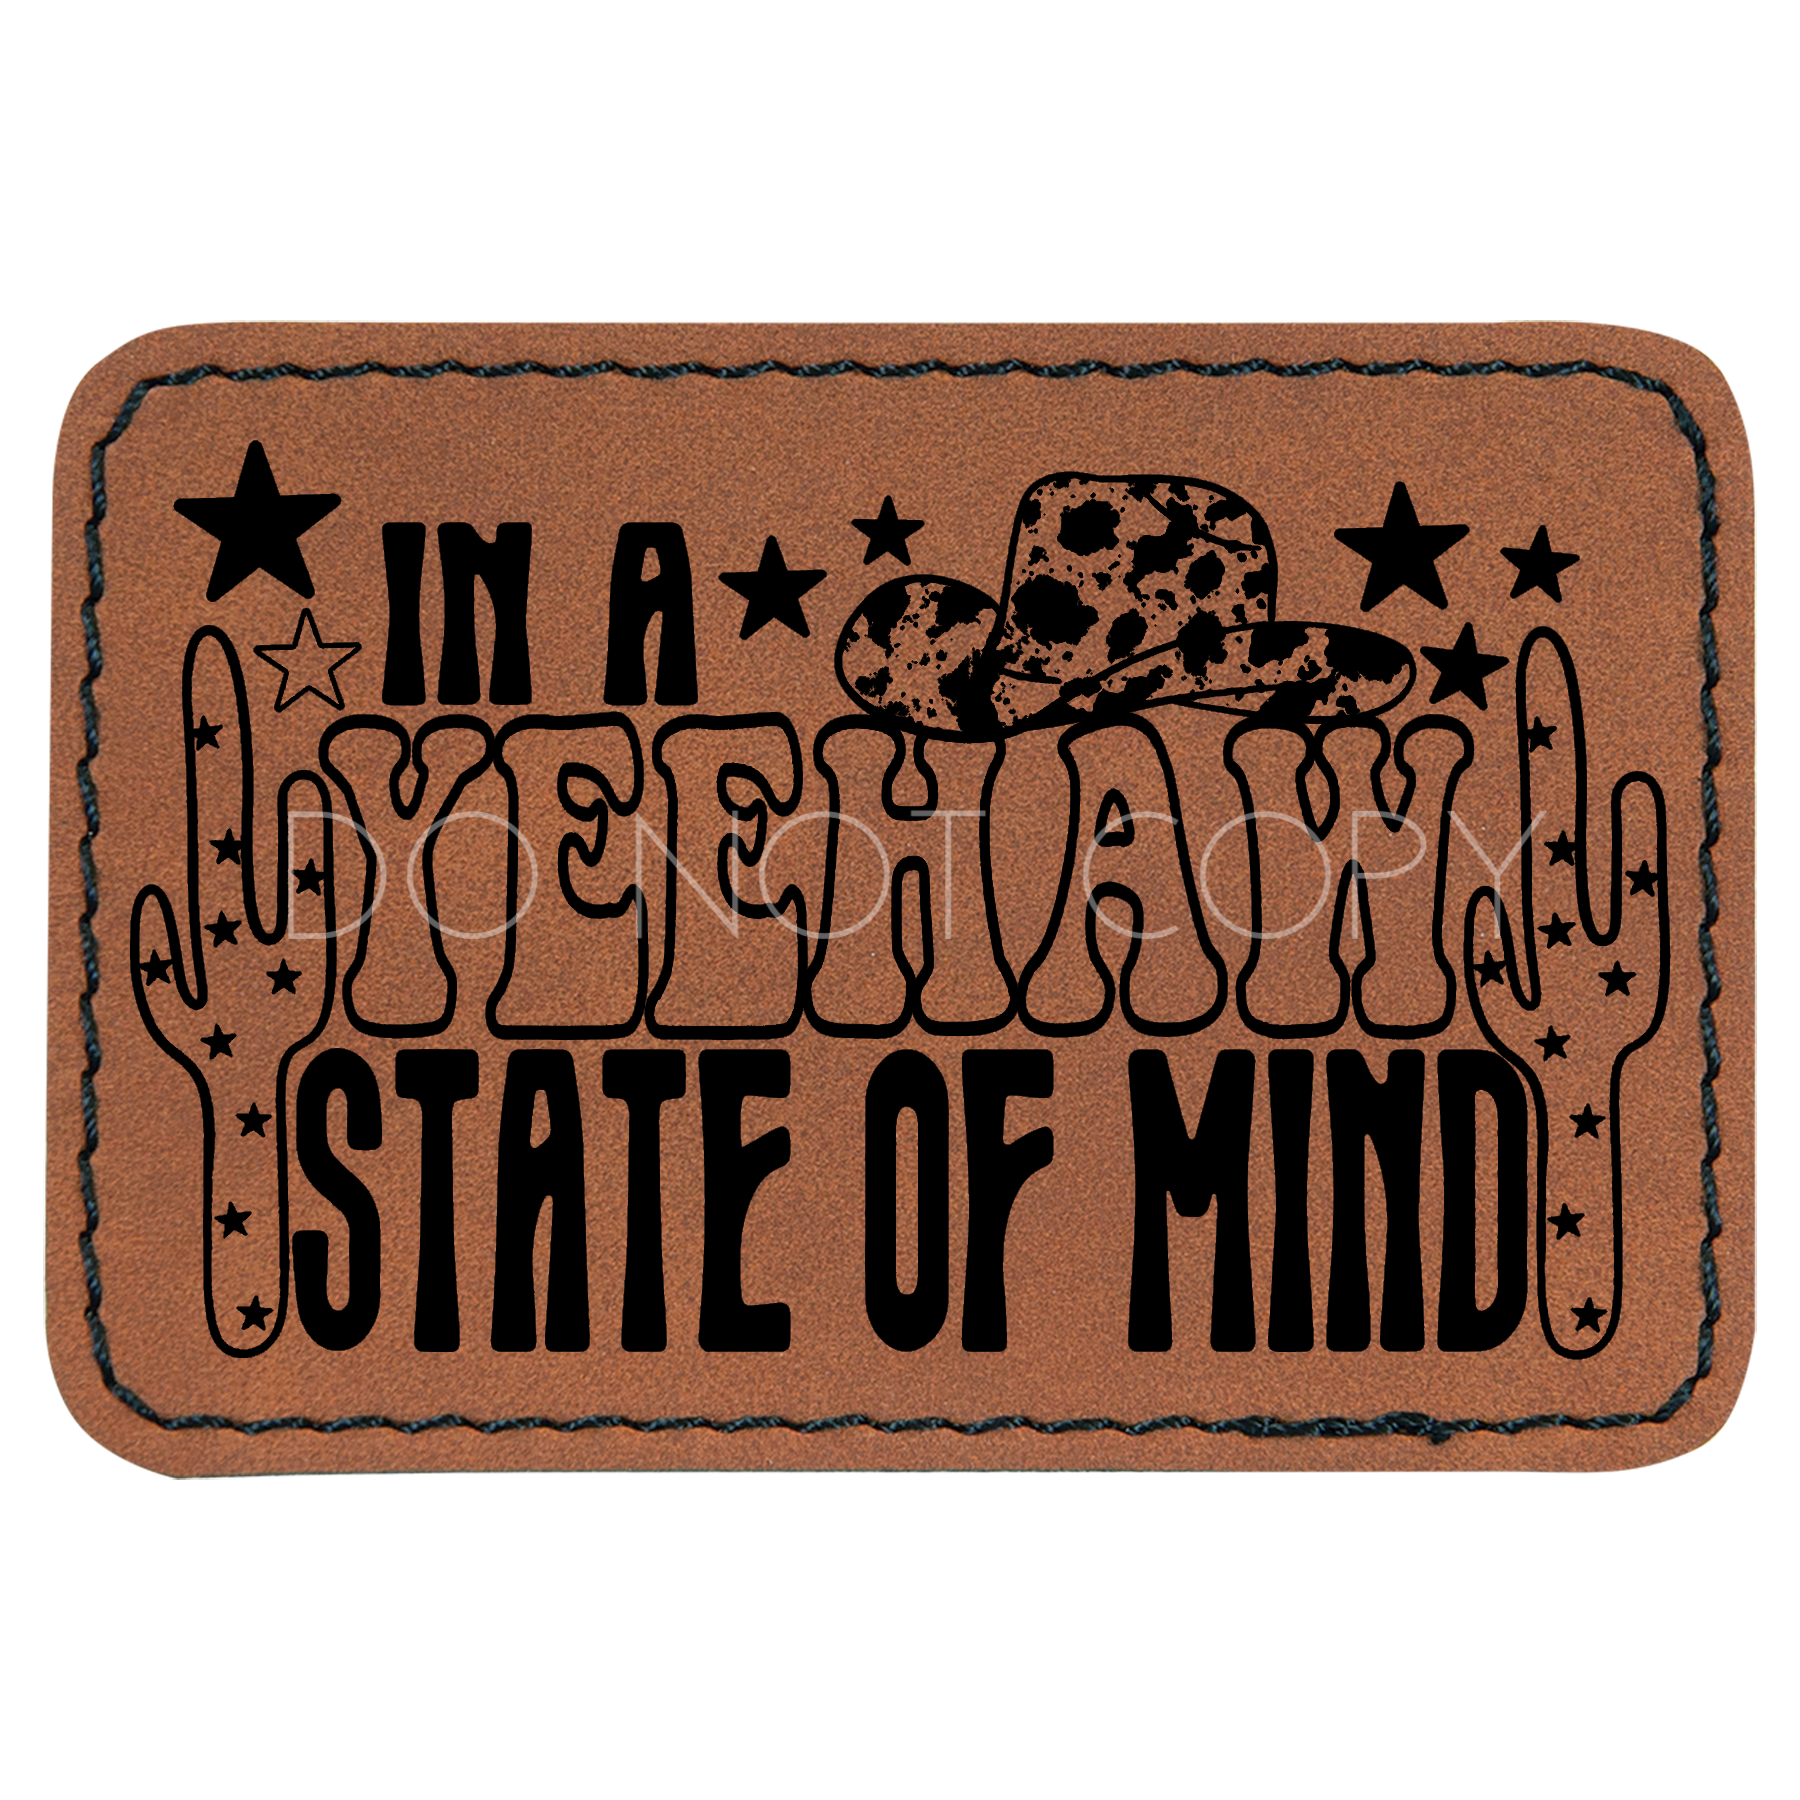 In A Yeehaw State Of Mind Patch